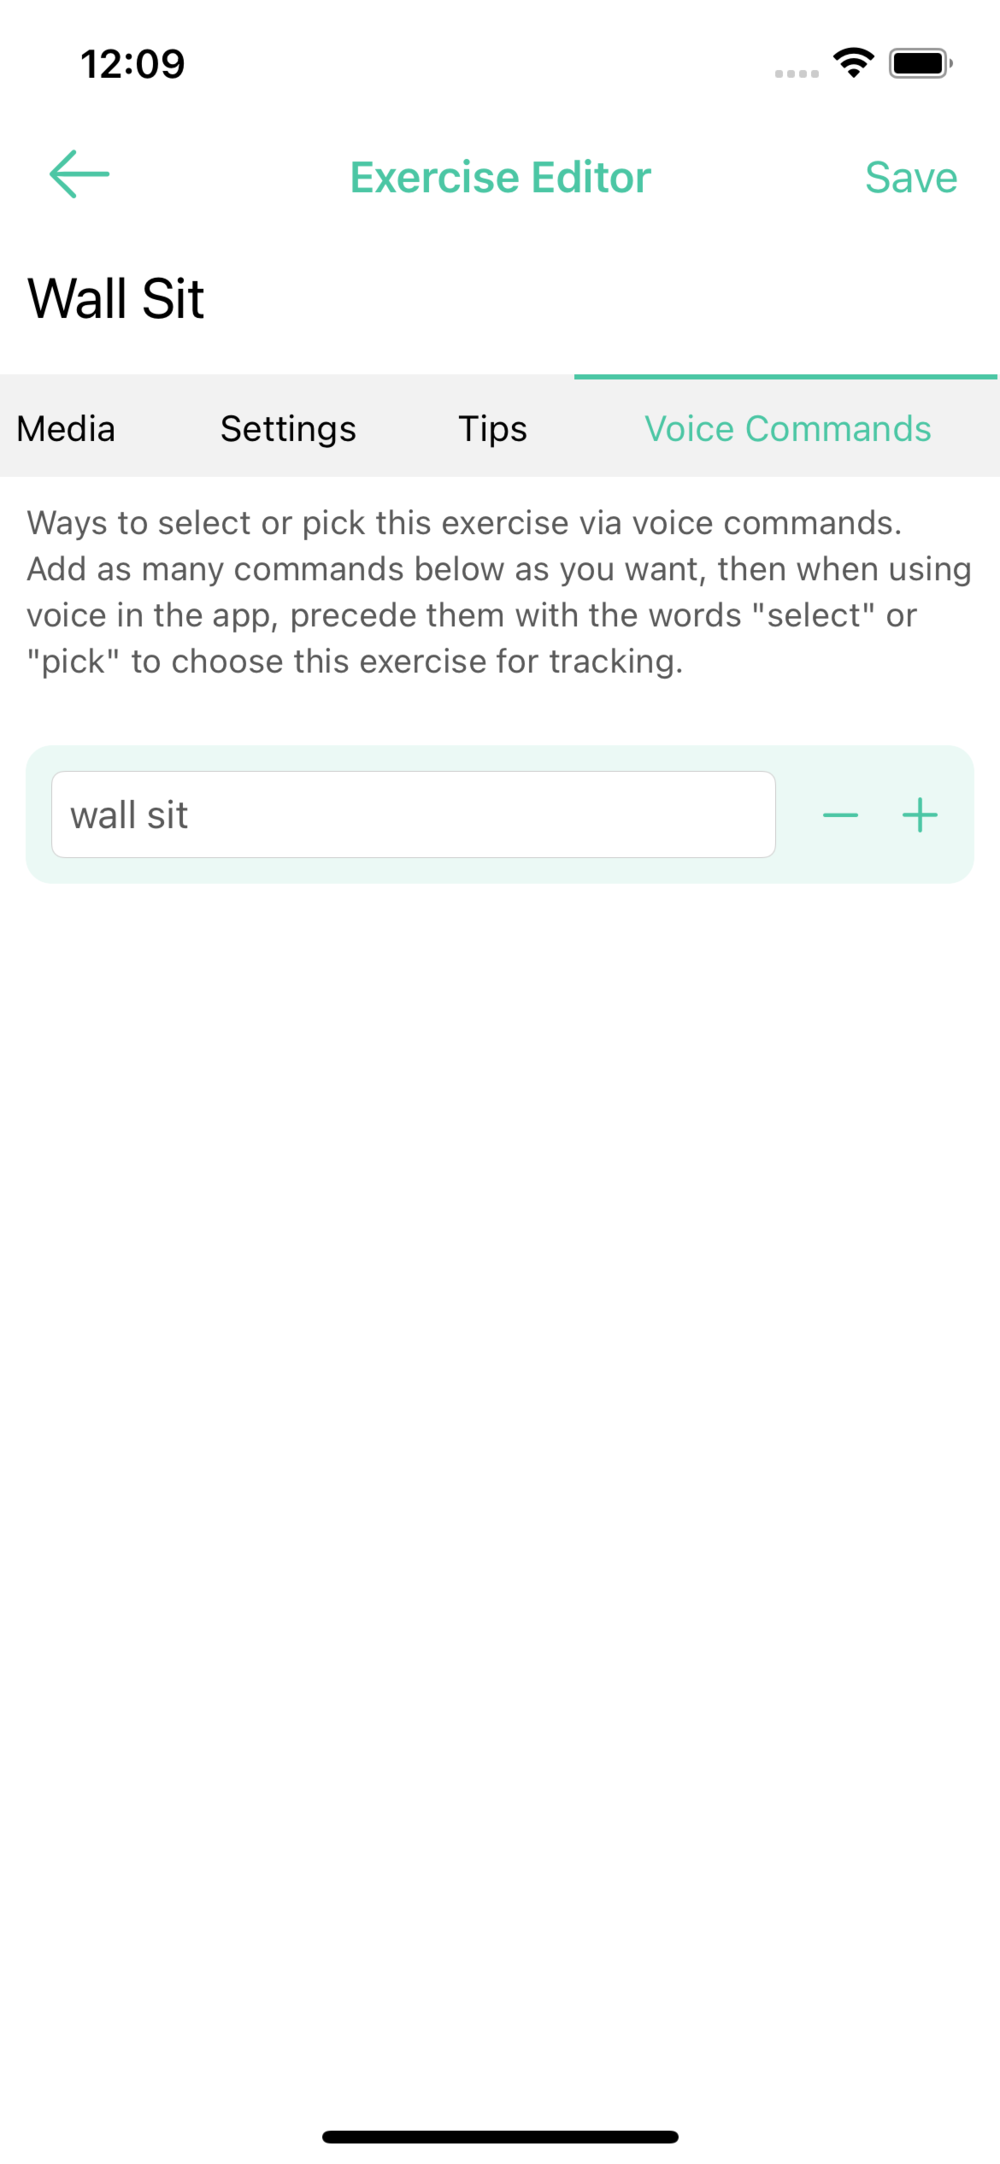 Specify the voice command(s) for the custom exercises you create